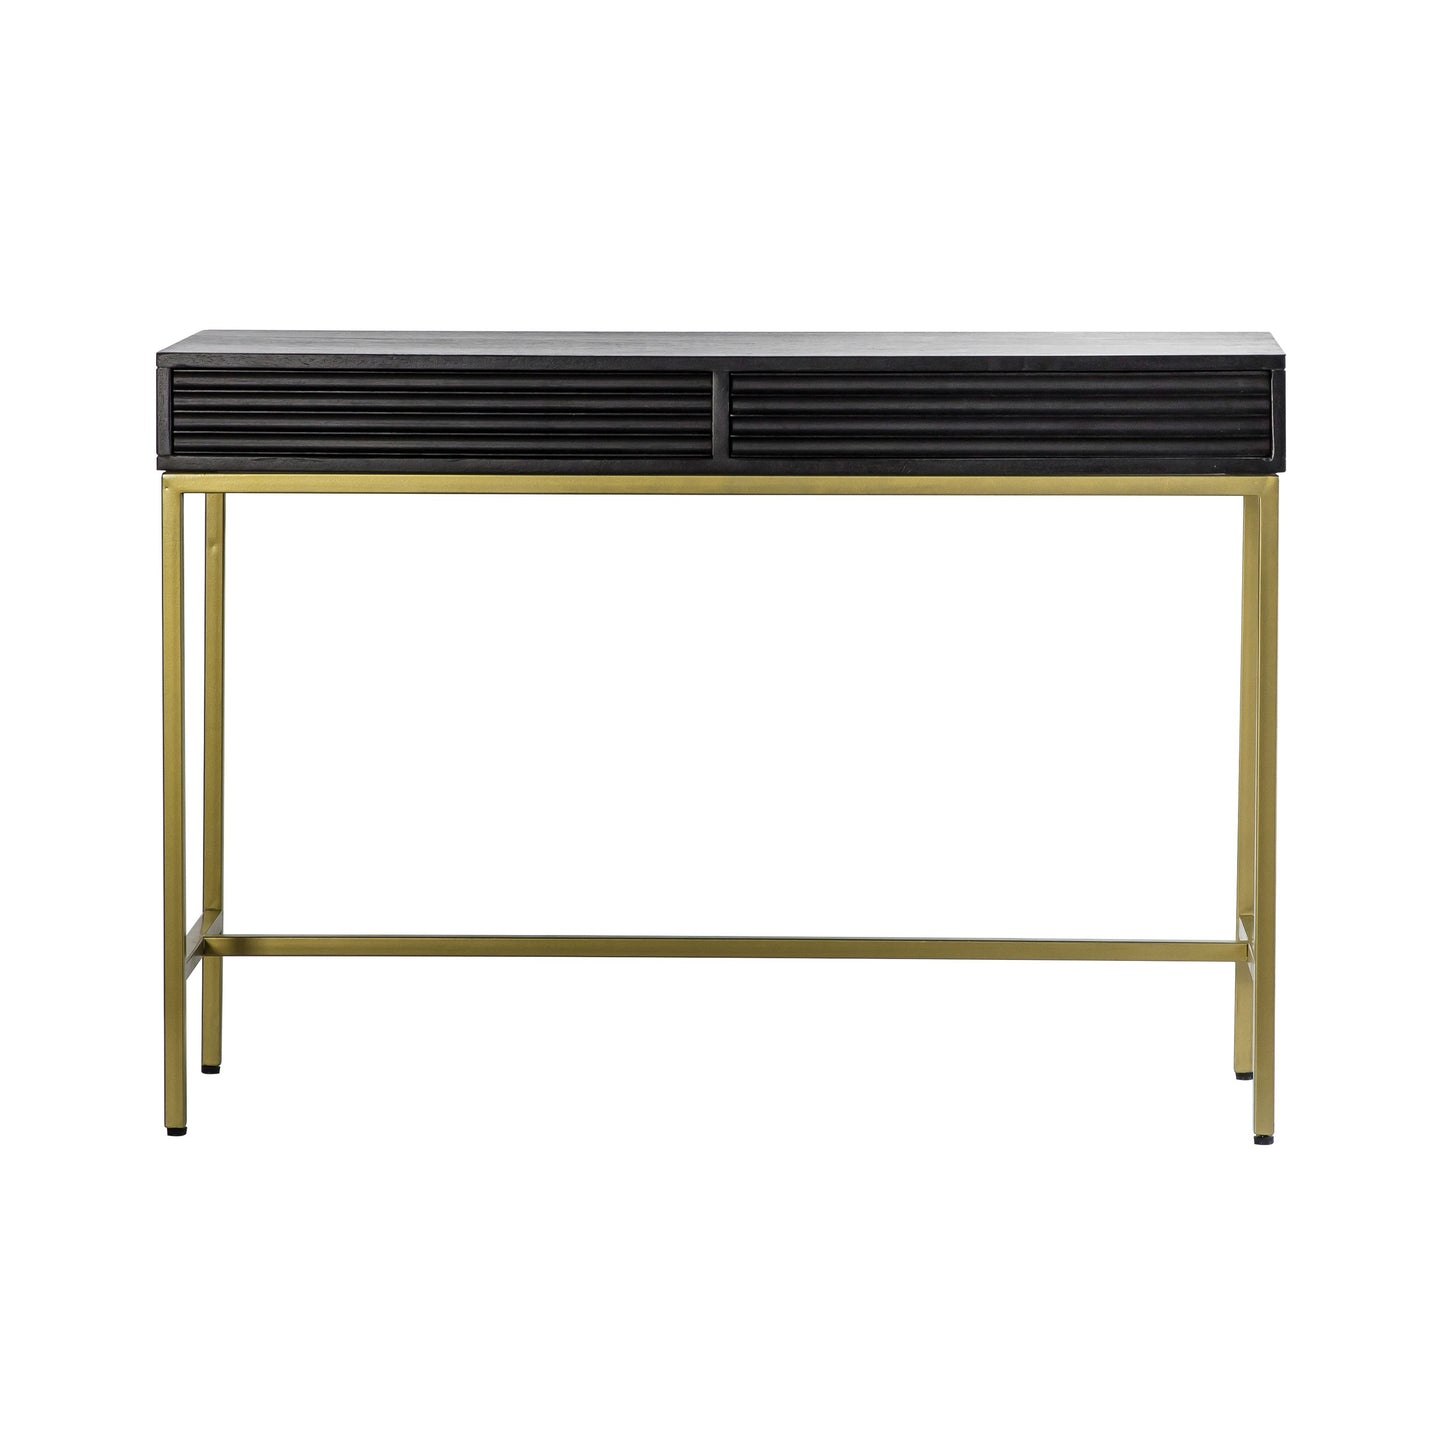 Nero 2 Drawer Console Table  - 1100x400x780mm